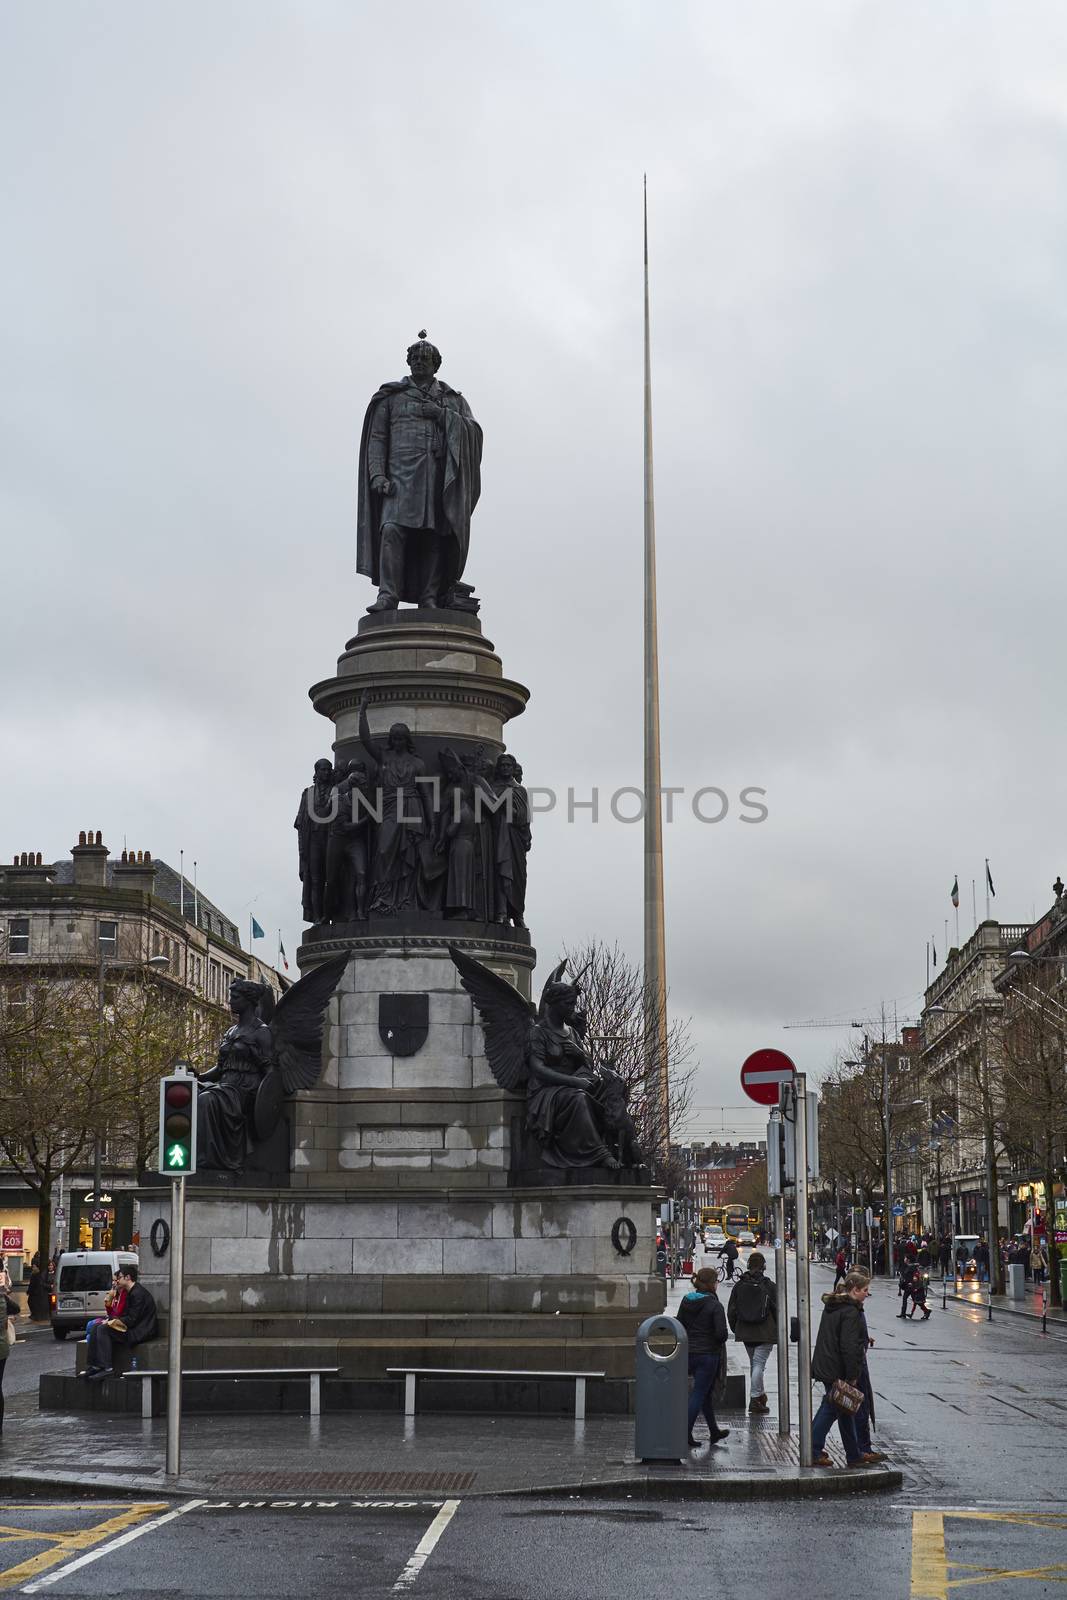 DUBLIN, IRELAND - JANUARY 05: Statue of Daniel O'Connell with overcast sky and Millennium Spire in the background. January 05, 2016 in Dublin